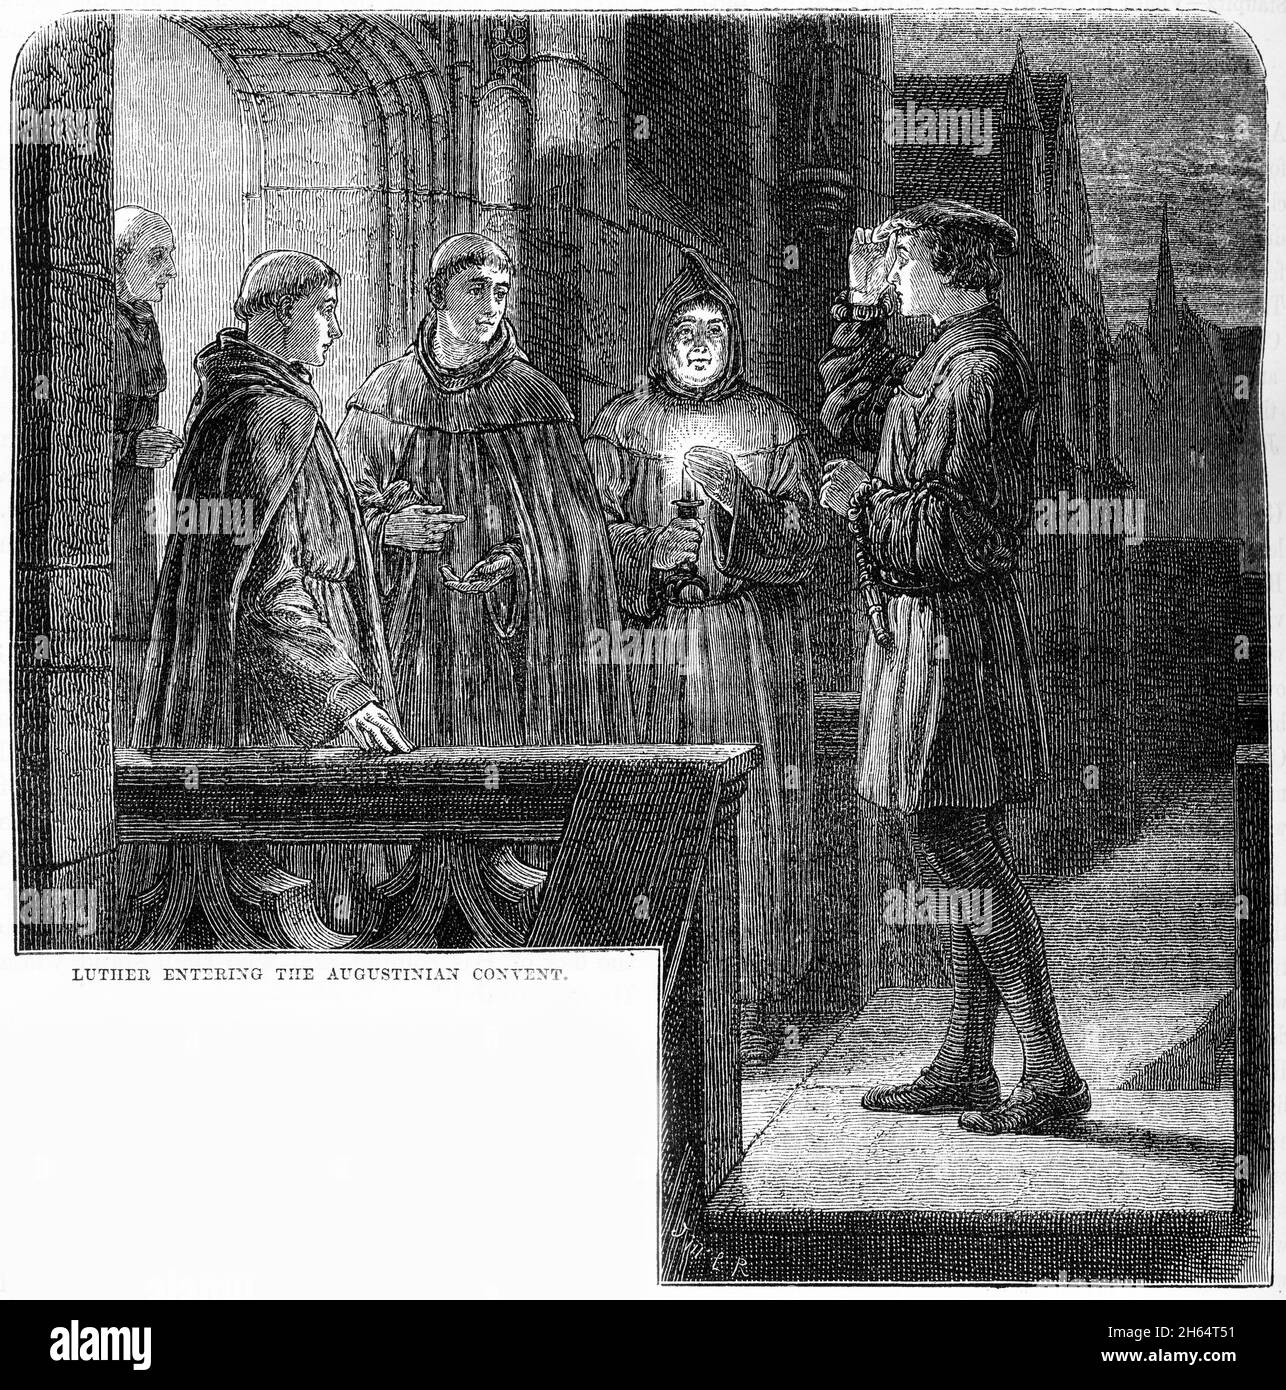 Engraving of Martin Luther entering the Augustinian Monastery as a young man, late 1400s. Stock Photo